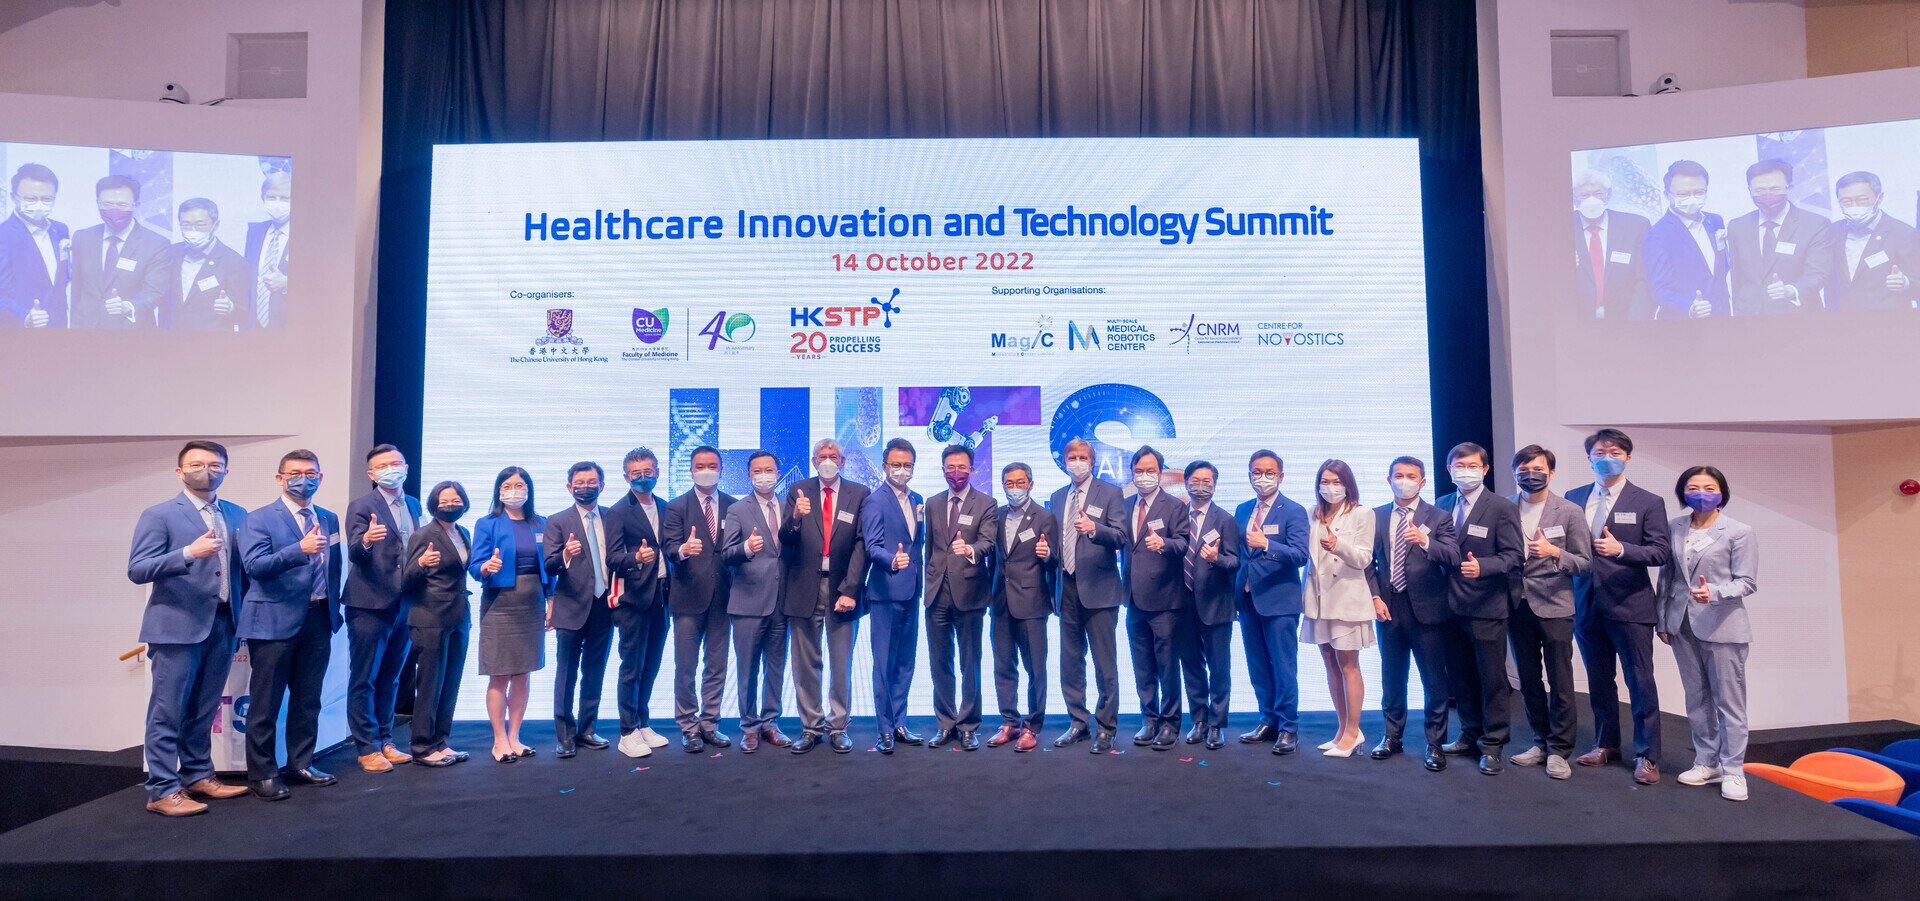 Healthcare Innovation and Technology Summit (HITS 2022)